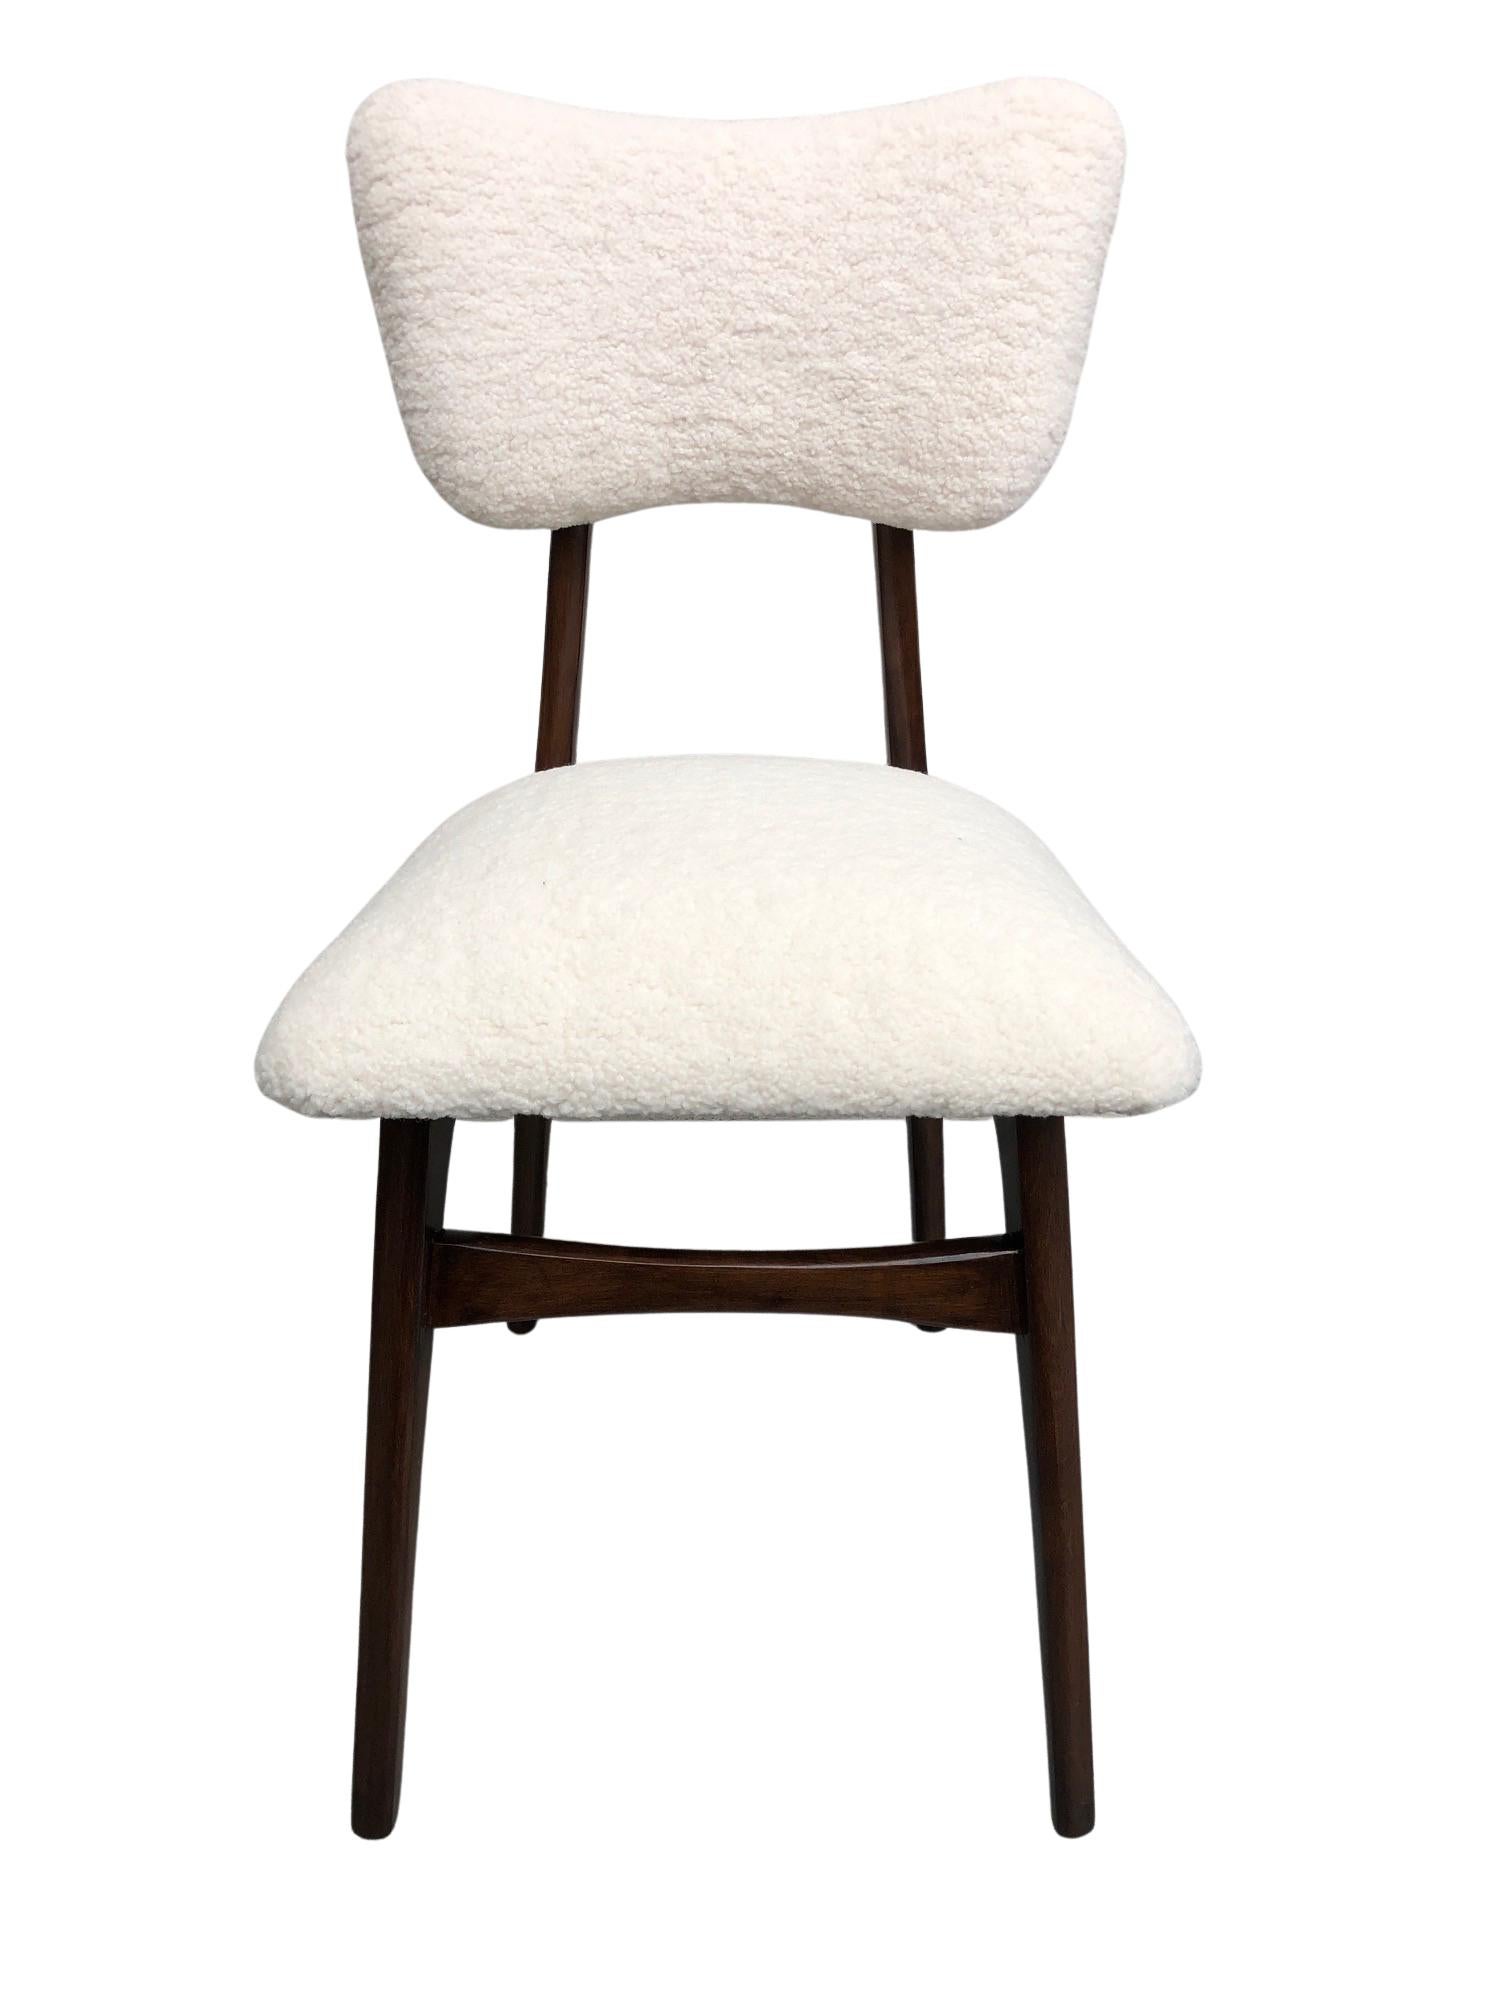 Set of 4 Midcentury Beige Bouclé Dining Chairs, Europe, 1960s For Sale 4